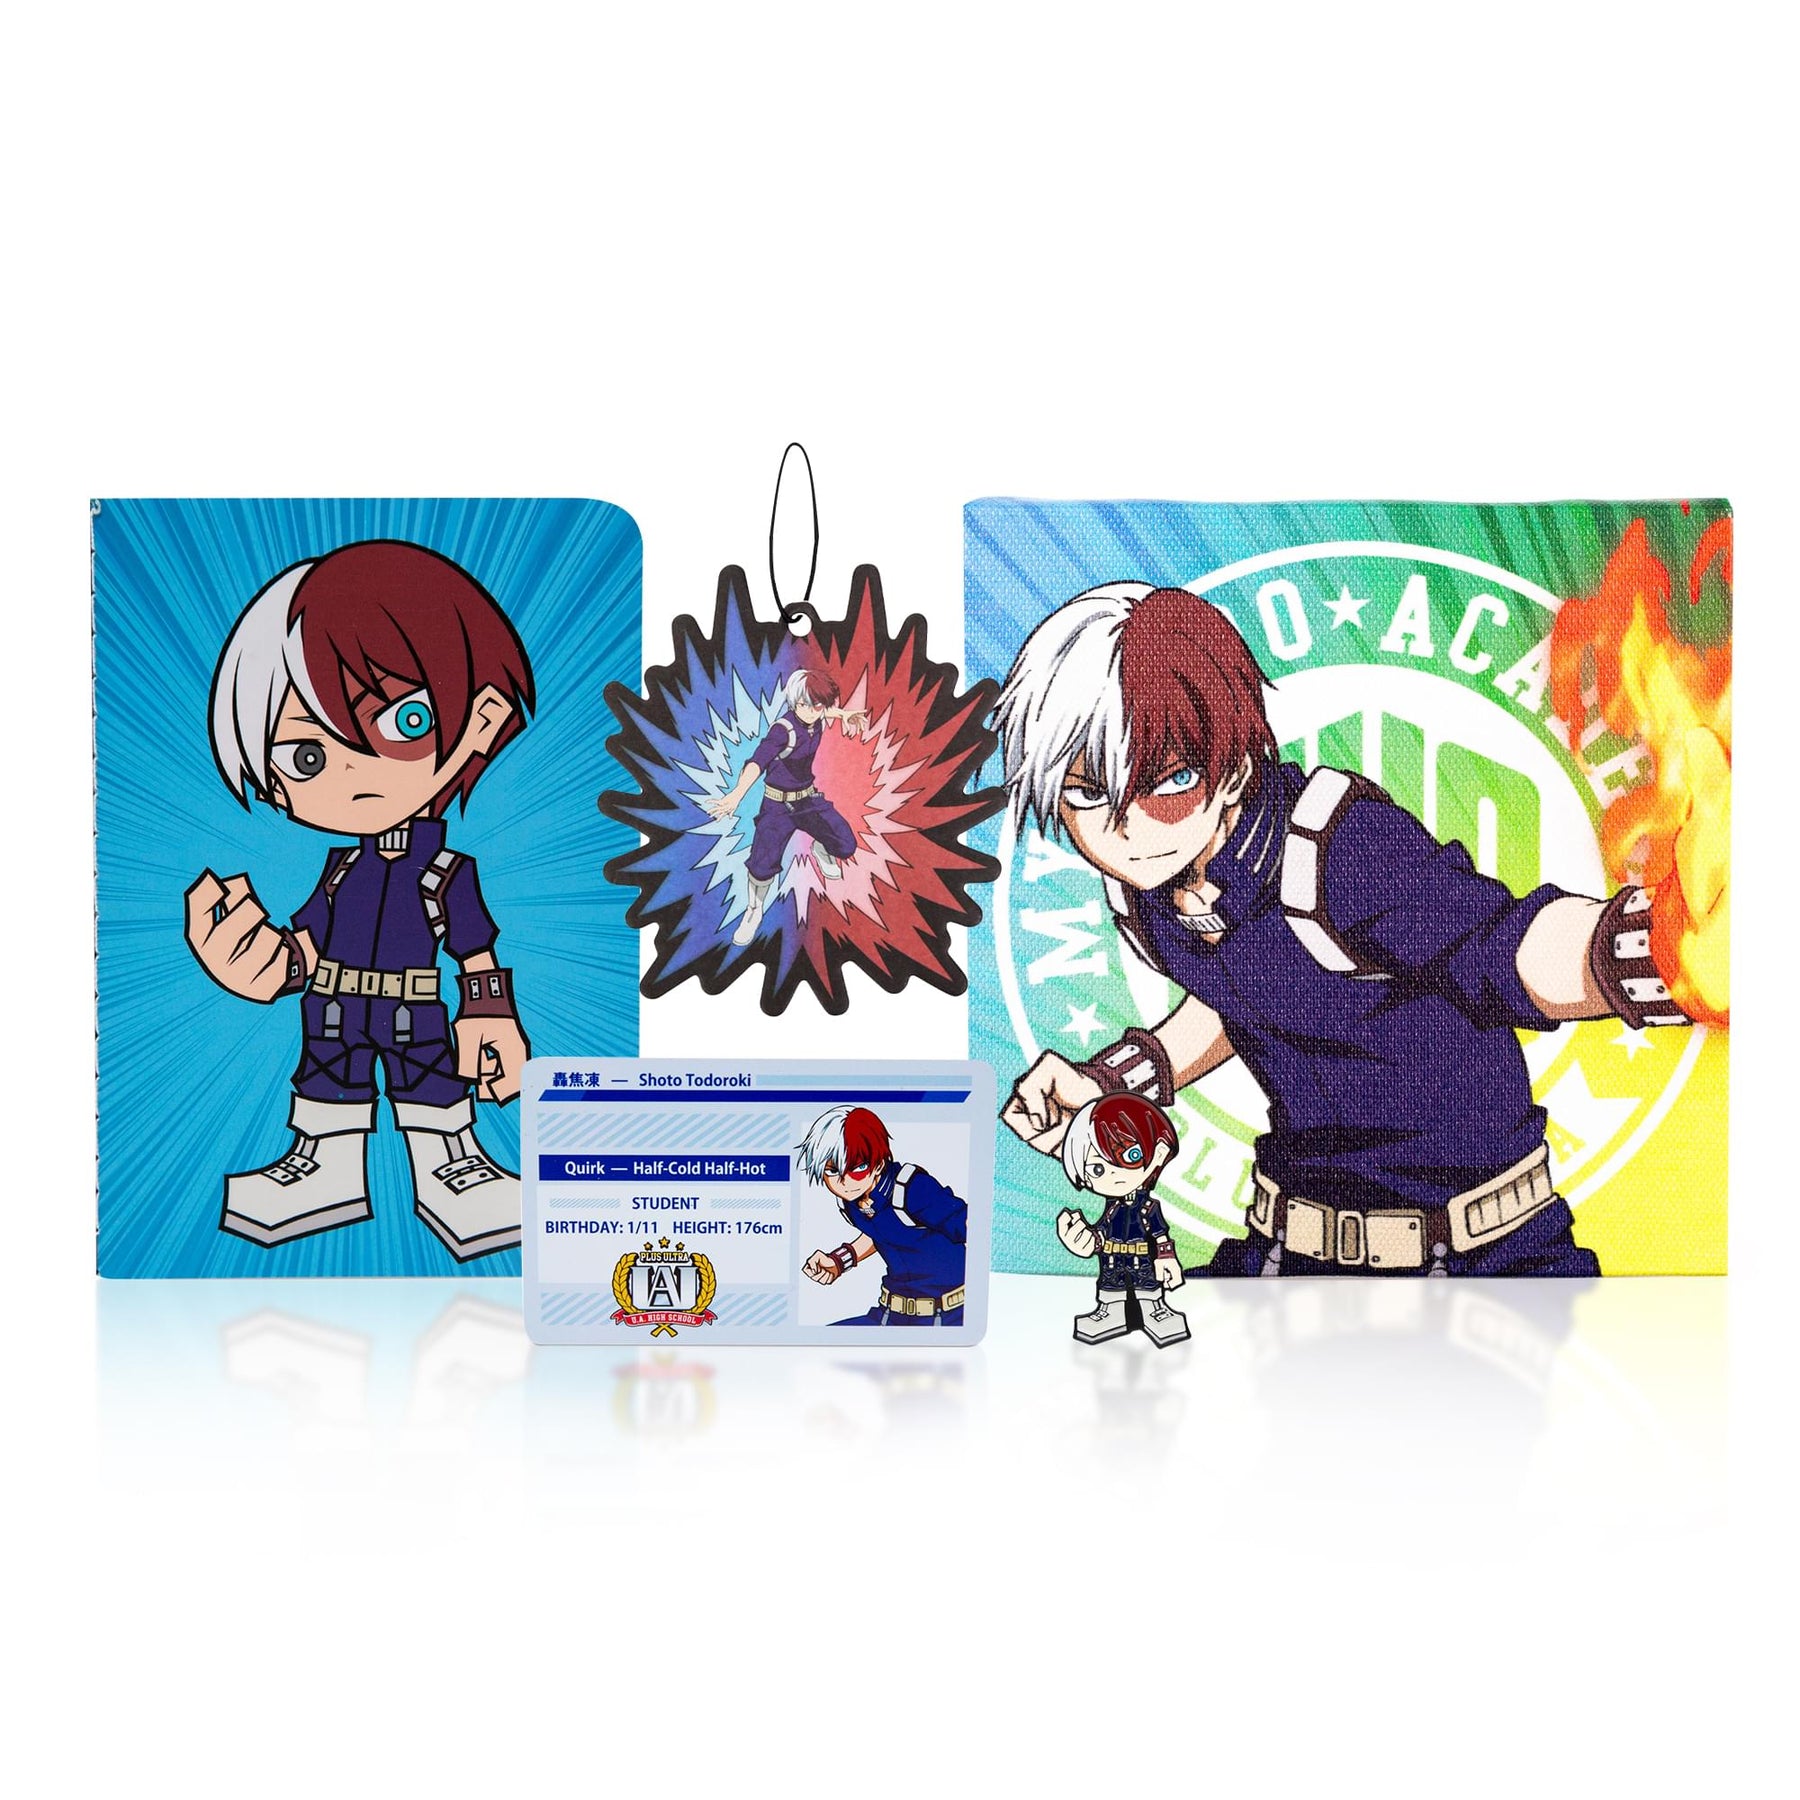 My Hero Academia LookSee Mystery Box | Includes 5 Collectibles | Shoto Todoroki